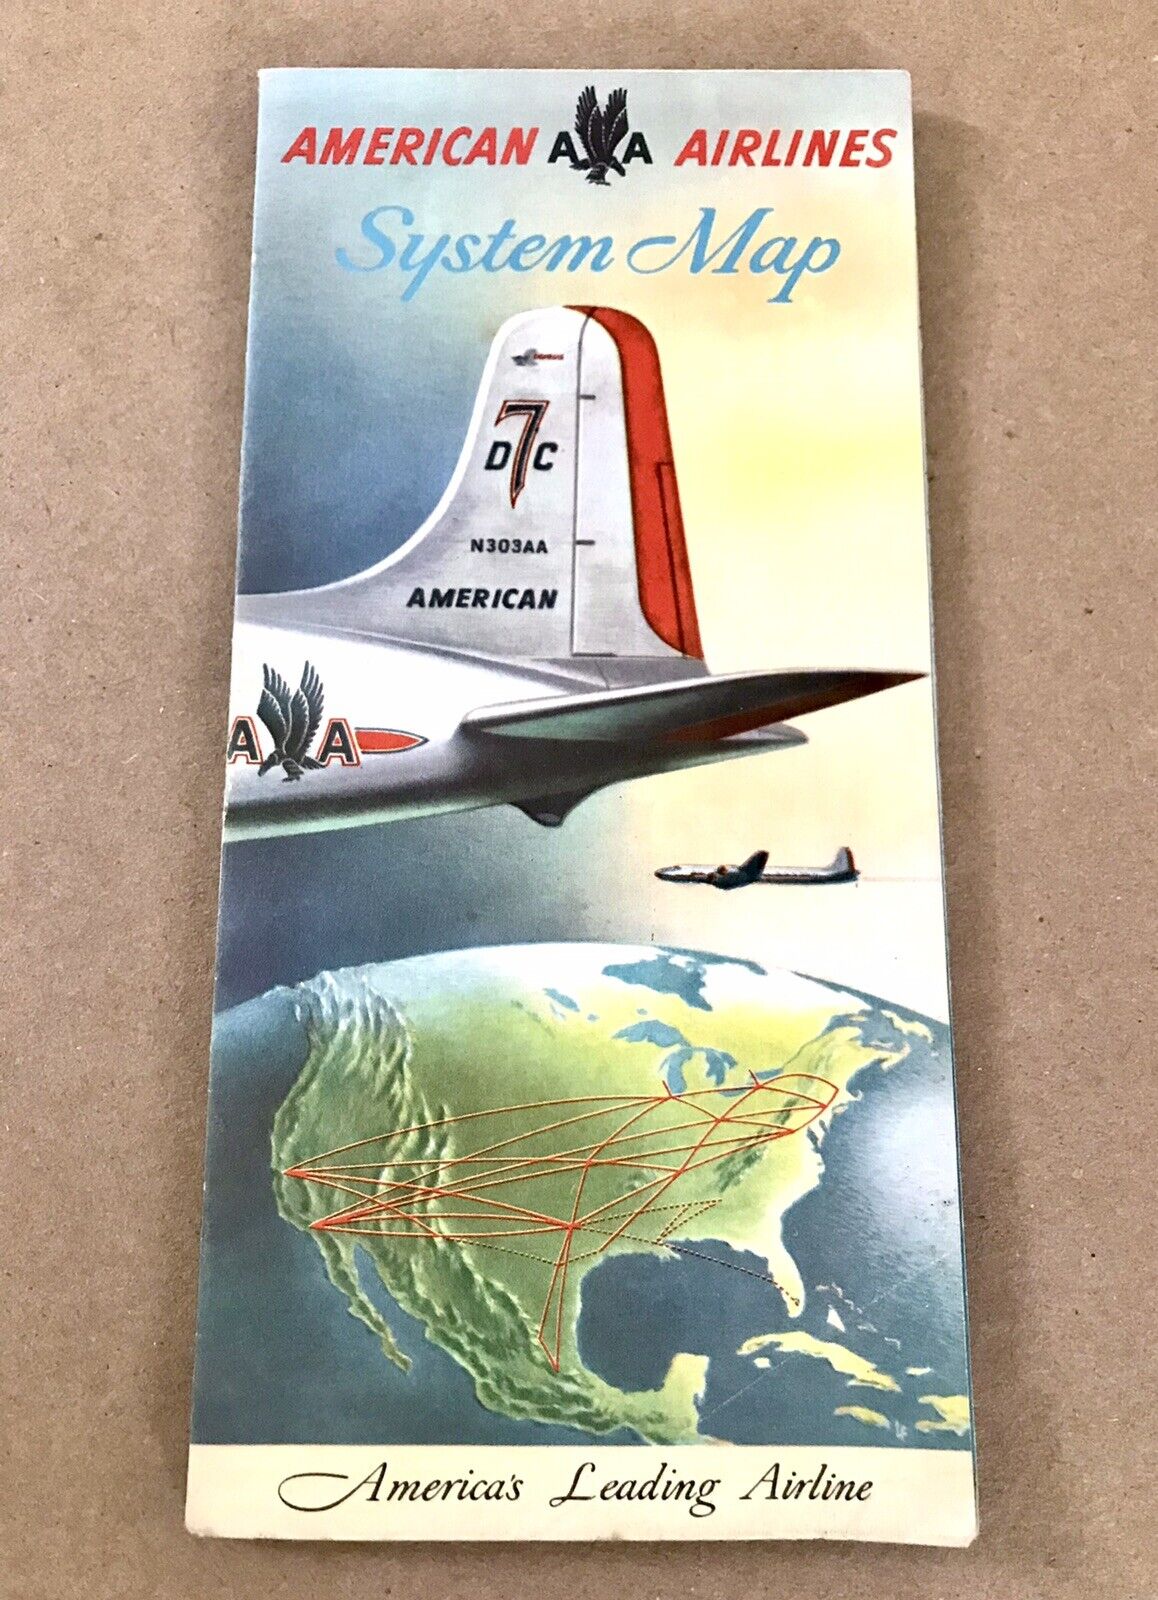 American Airlines, America\'s Leading Airlines, Vintage System Map - Very Good